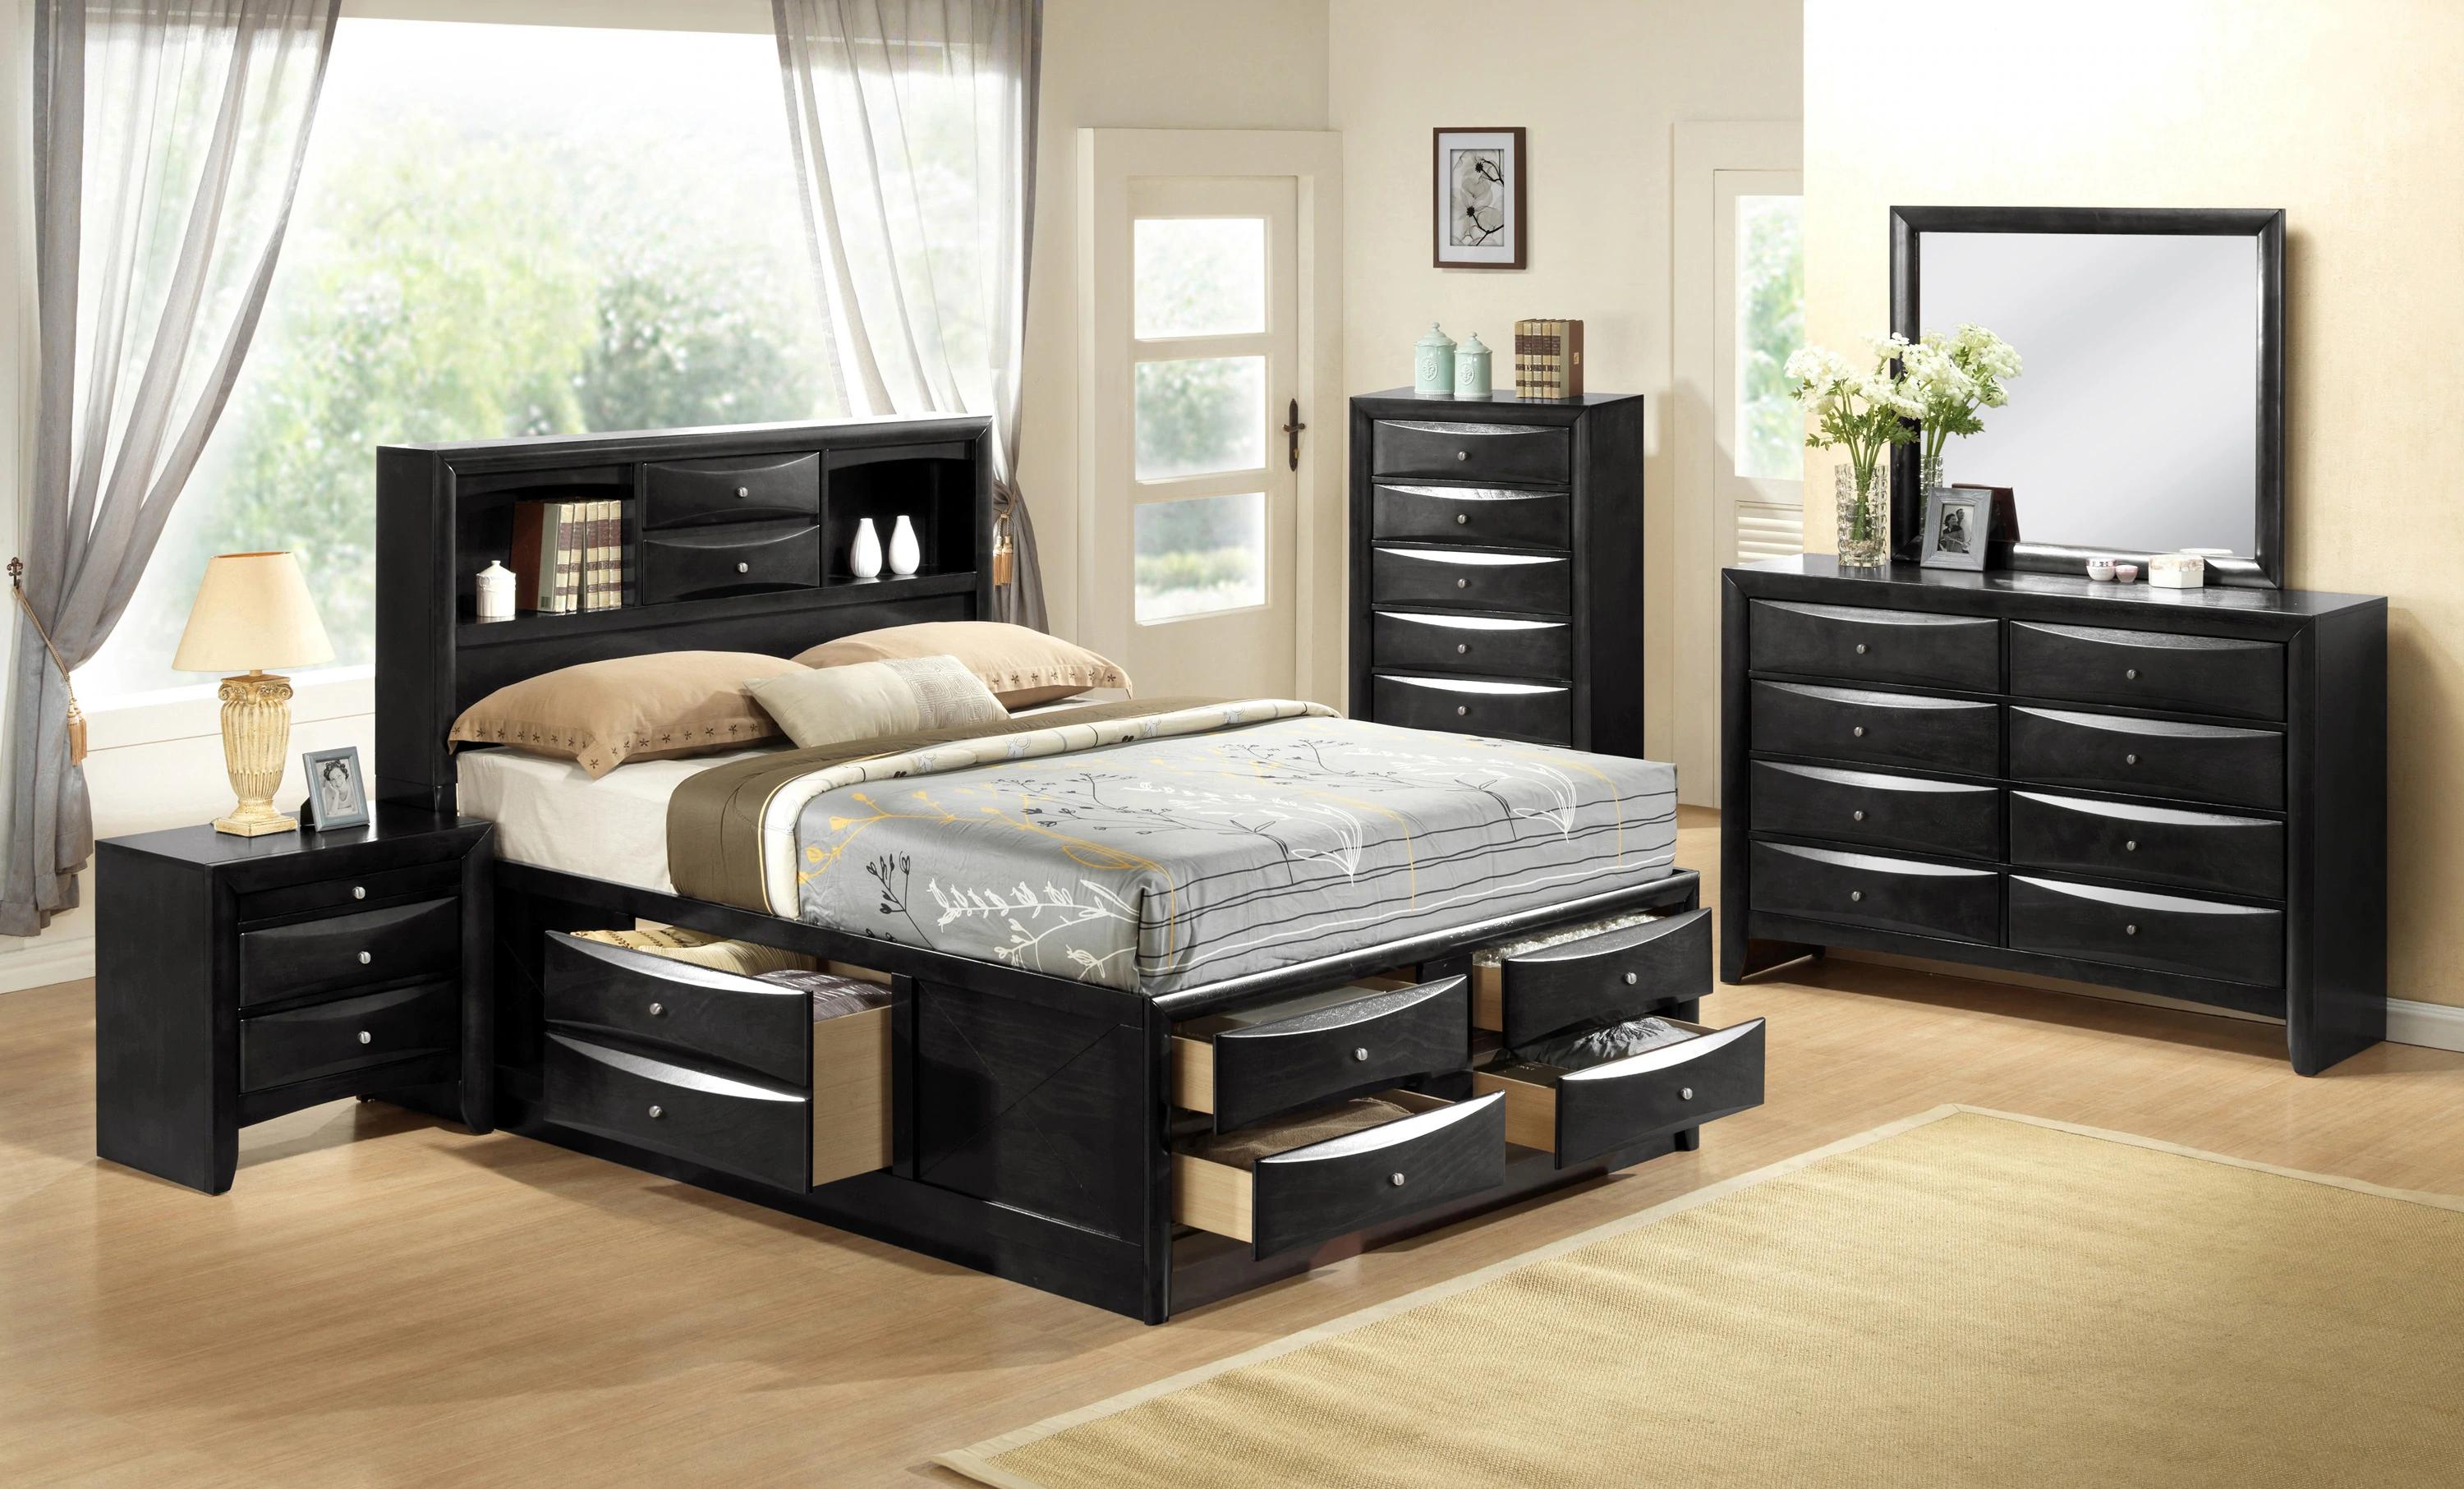 Contemporary, Transitional Storage Bedroom Set Emily B4285-Q-Bed-6pcs in Black 